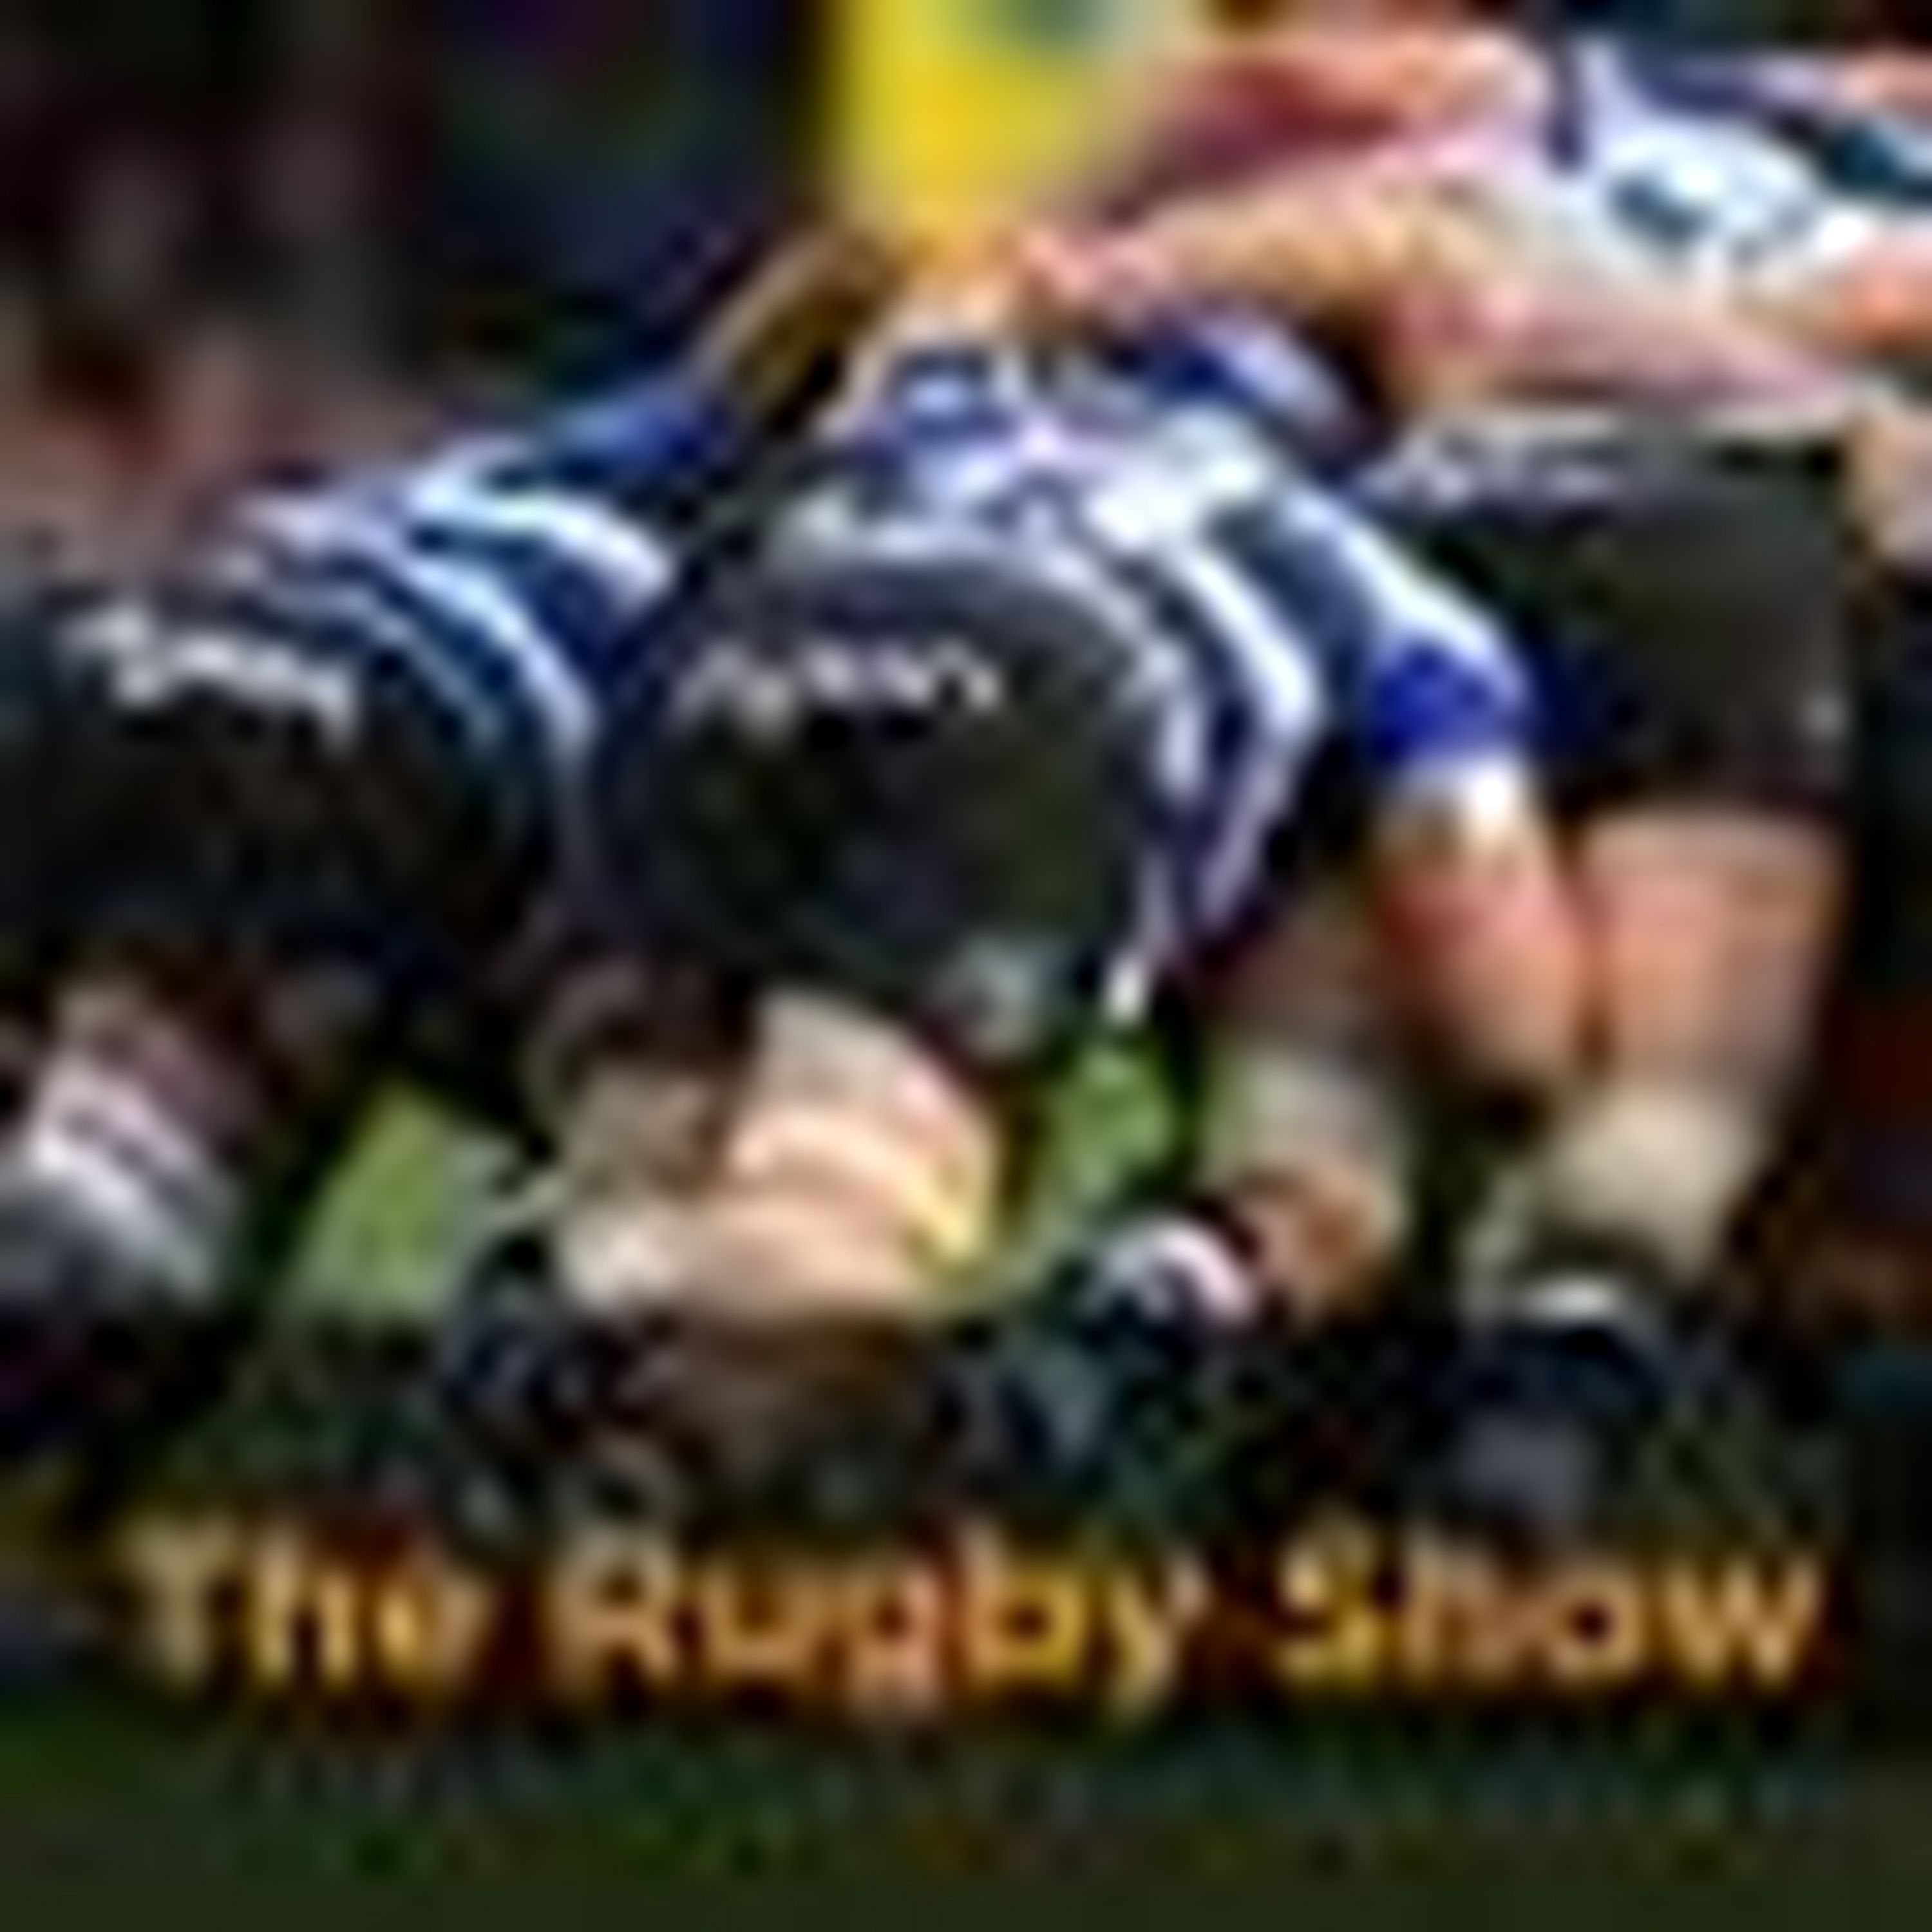 The Rugby Show podcast on talkSPORT 2 - April 3, 2018